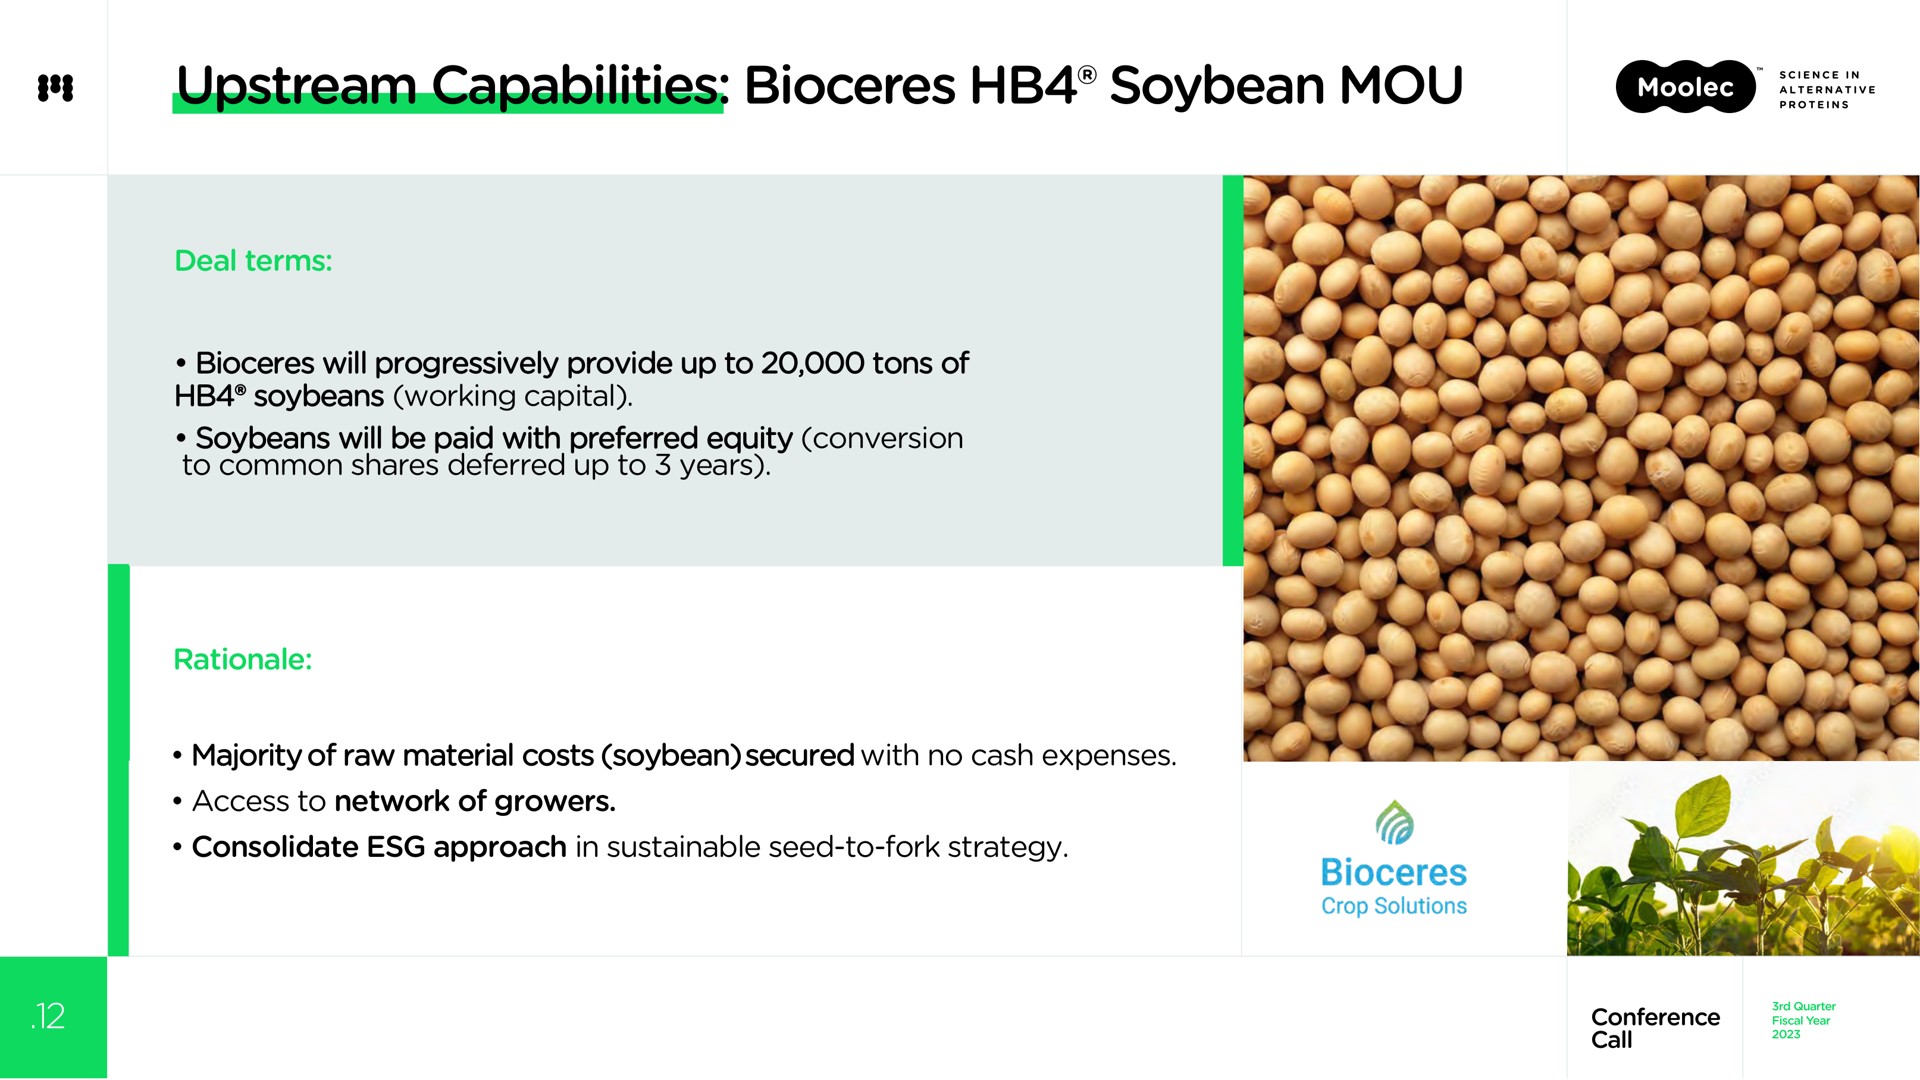 upstream capabilities soybean mou deal terms will progressively provide up to tons of soybeans working capital soybeans will be paid with preferred equity conversion to common shares deferred up to years rationale majority of raw material costs soybean secured with no cash expenses access to network of growers consolidate approach in sustainable seed to fork strategy | Moolec Science